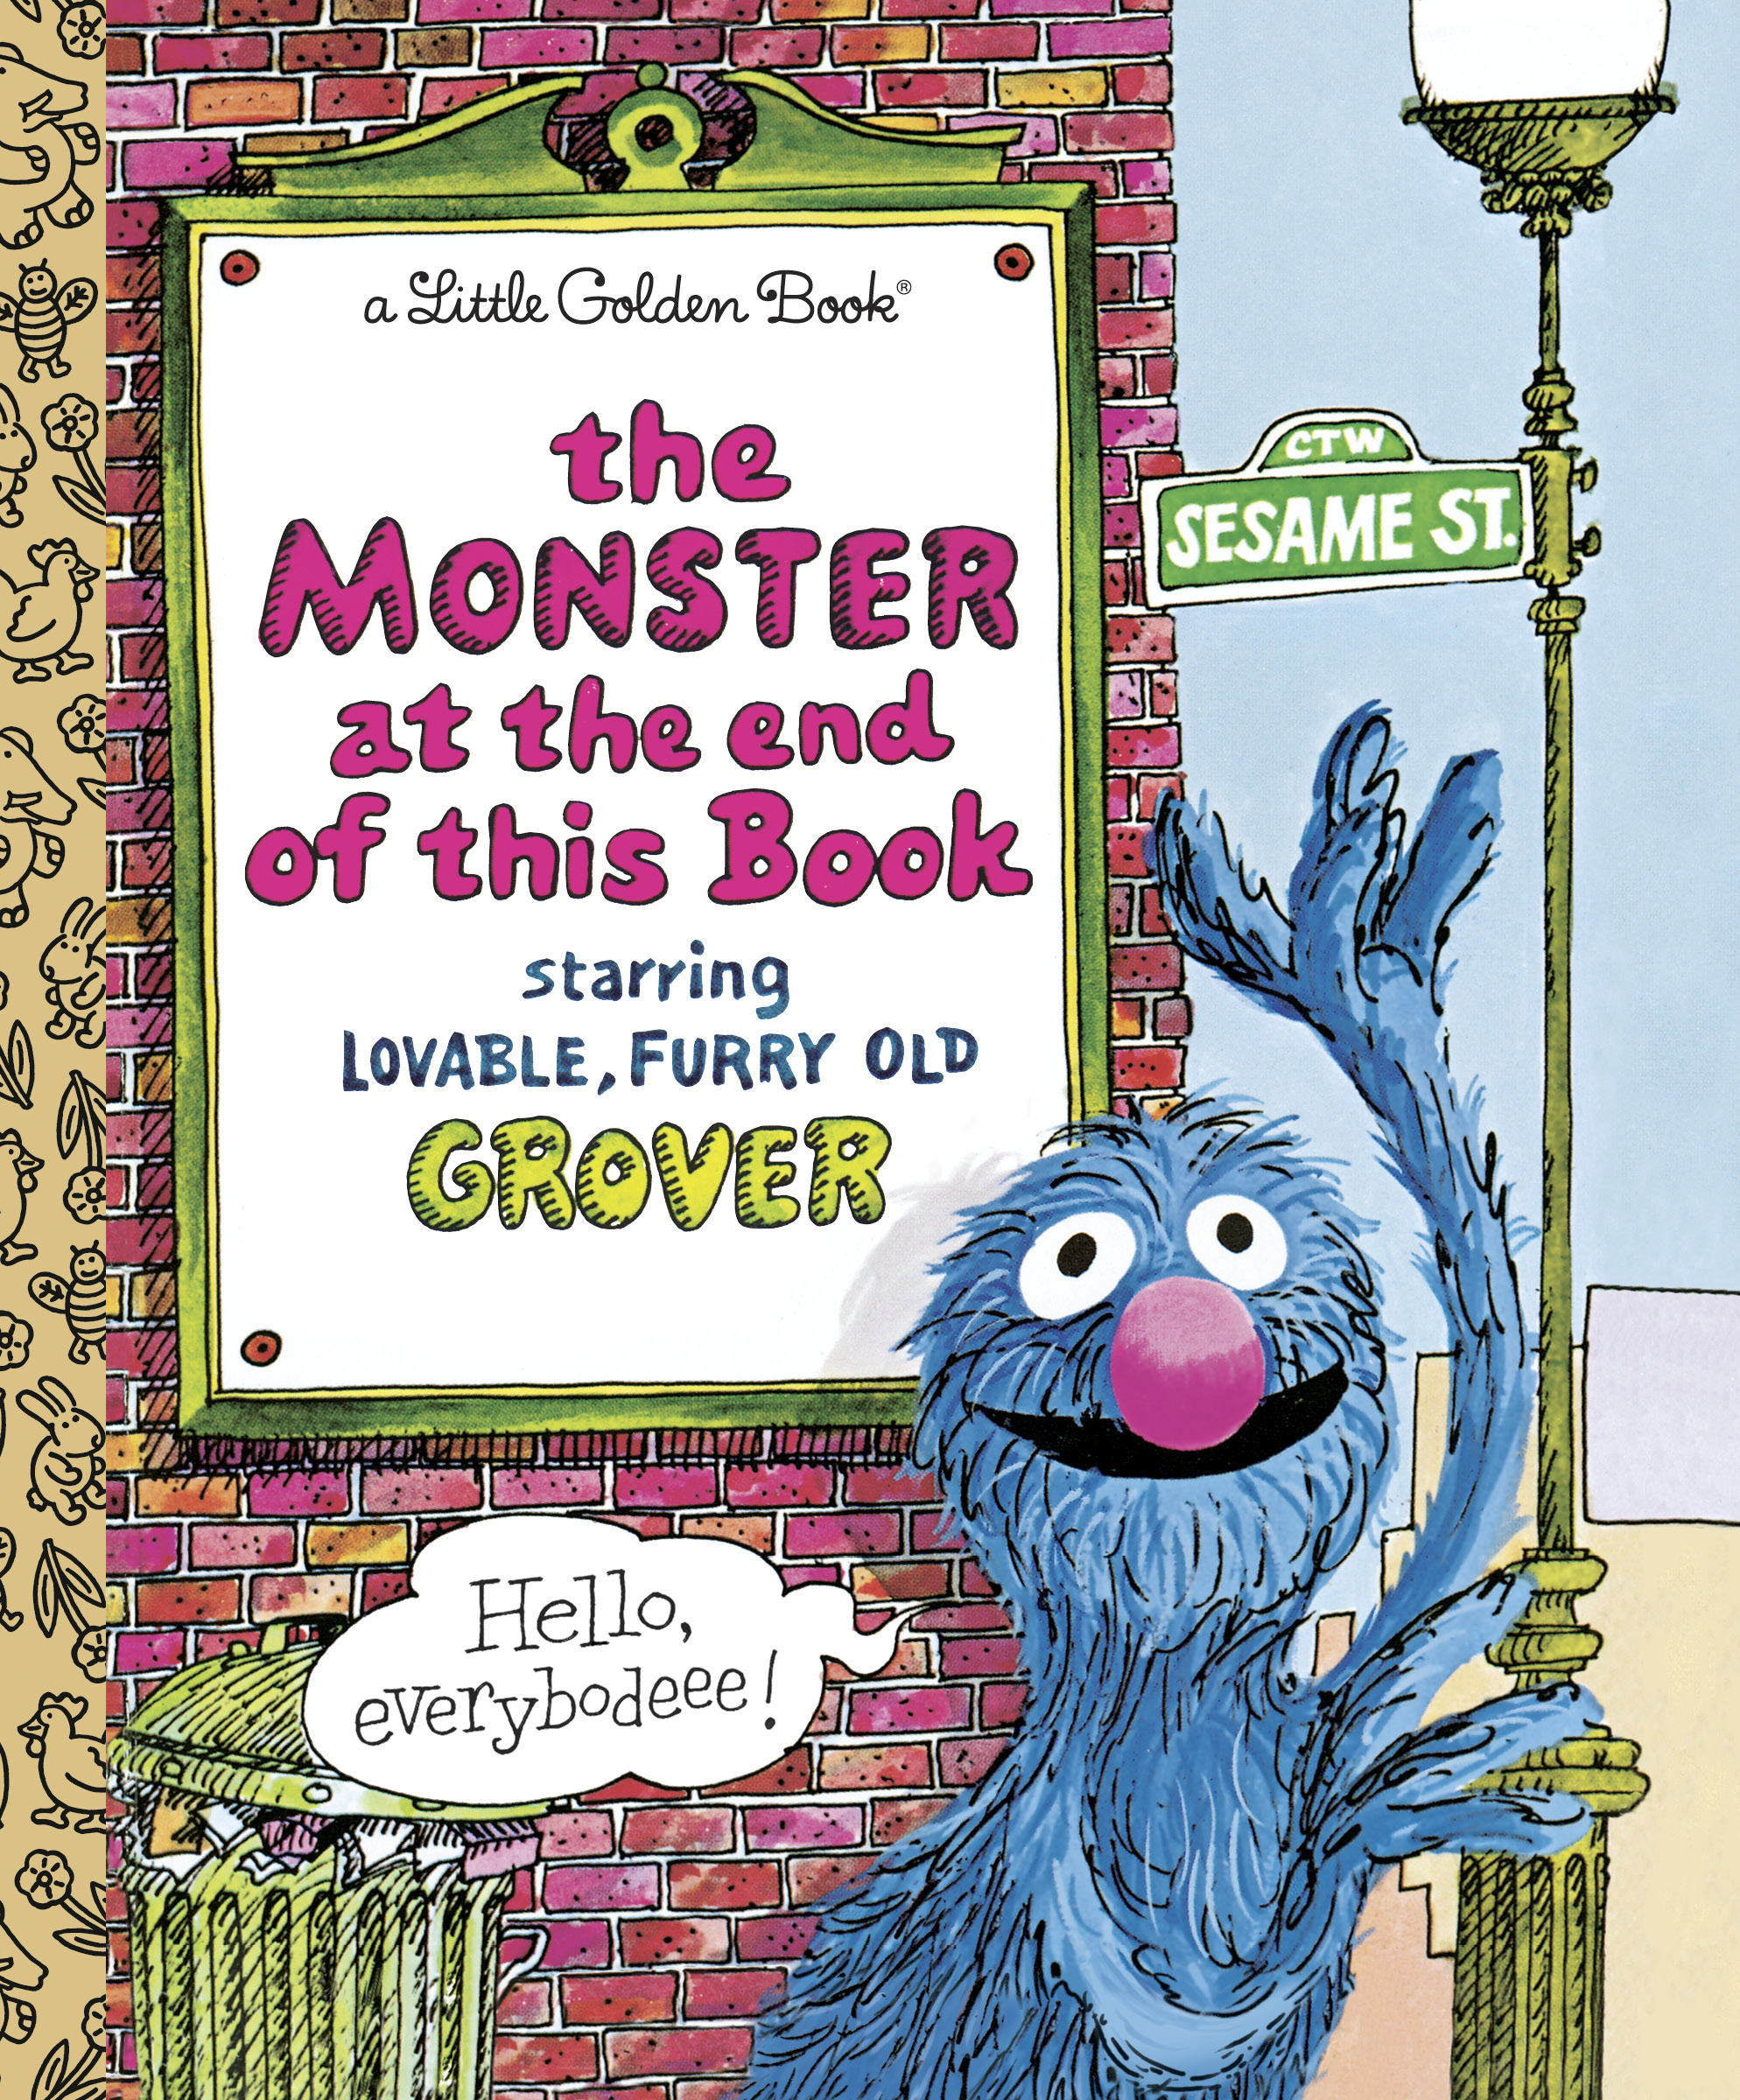 The Monster at the End of This Book (Sesame Street) | Stone, Jon (Auteur) | Smollin, Michael (Illustrateur)